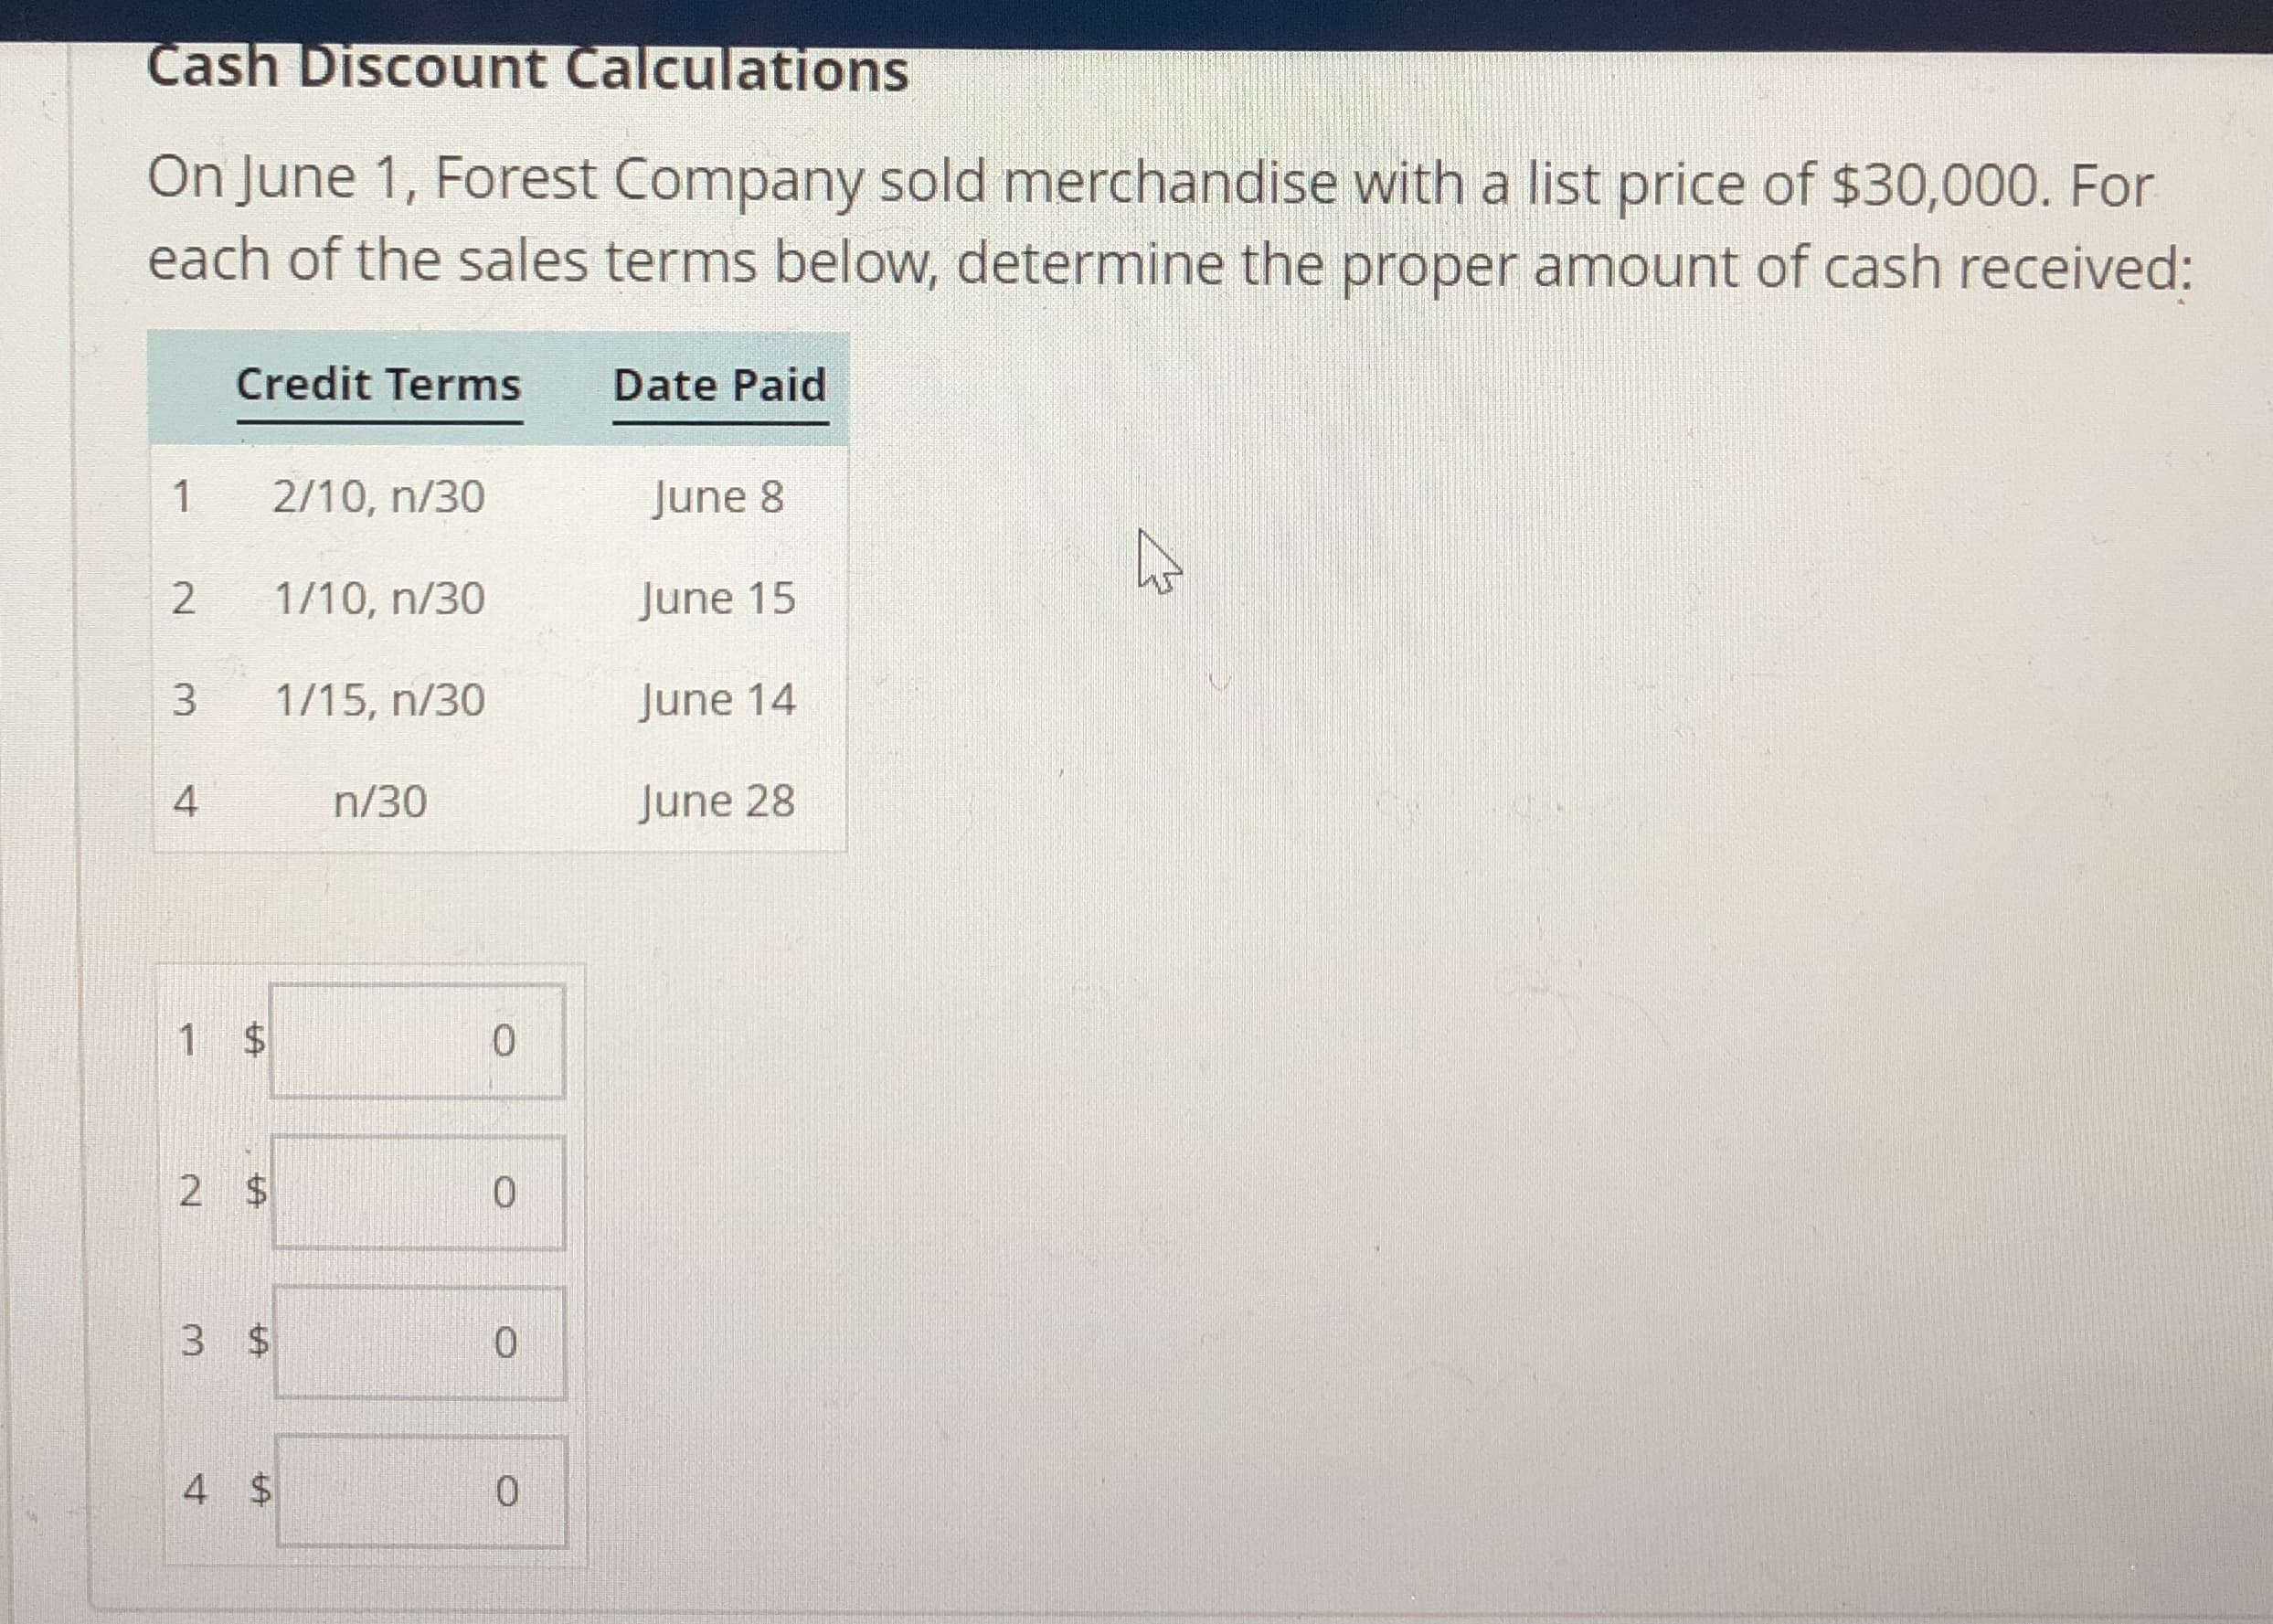 Cash Discount Calculations
On June 1, Forest Company sold merchandise with a list price of $30,000. For
each of the sales terms below, determine the proper amount of cash received:
Credit Terms Date Paid
1 2/10, n/30
2 1/10, n/30 June 15
3 1/15, n/30 June 14
4 n/30
June 8
June 28
4
0
